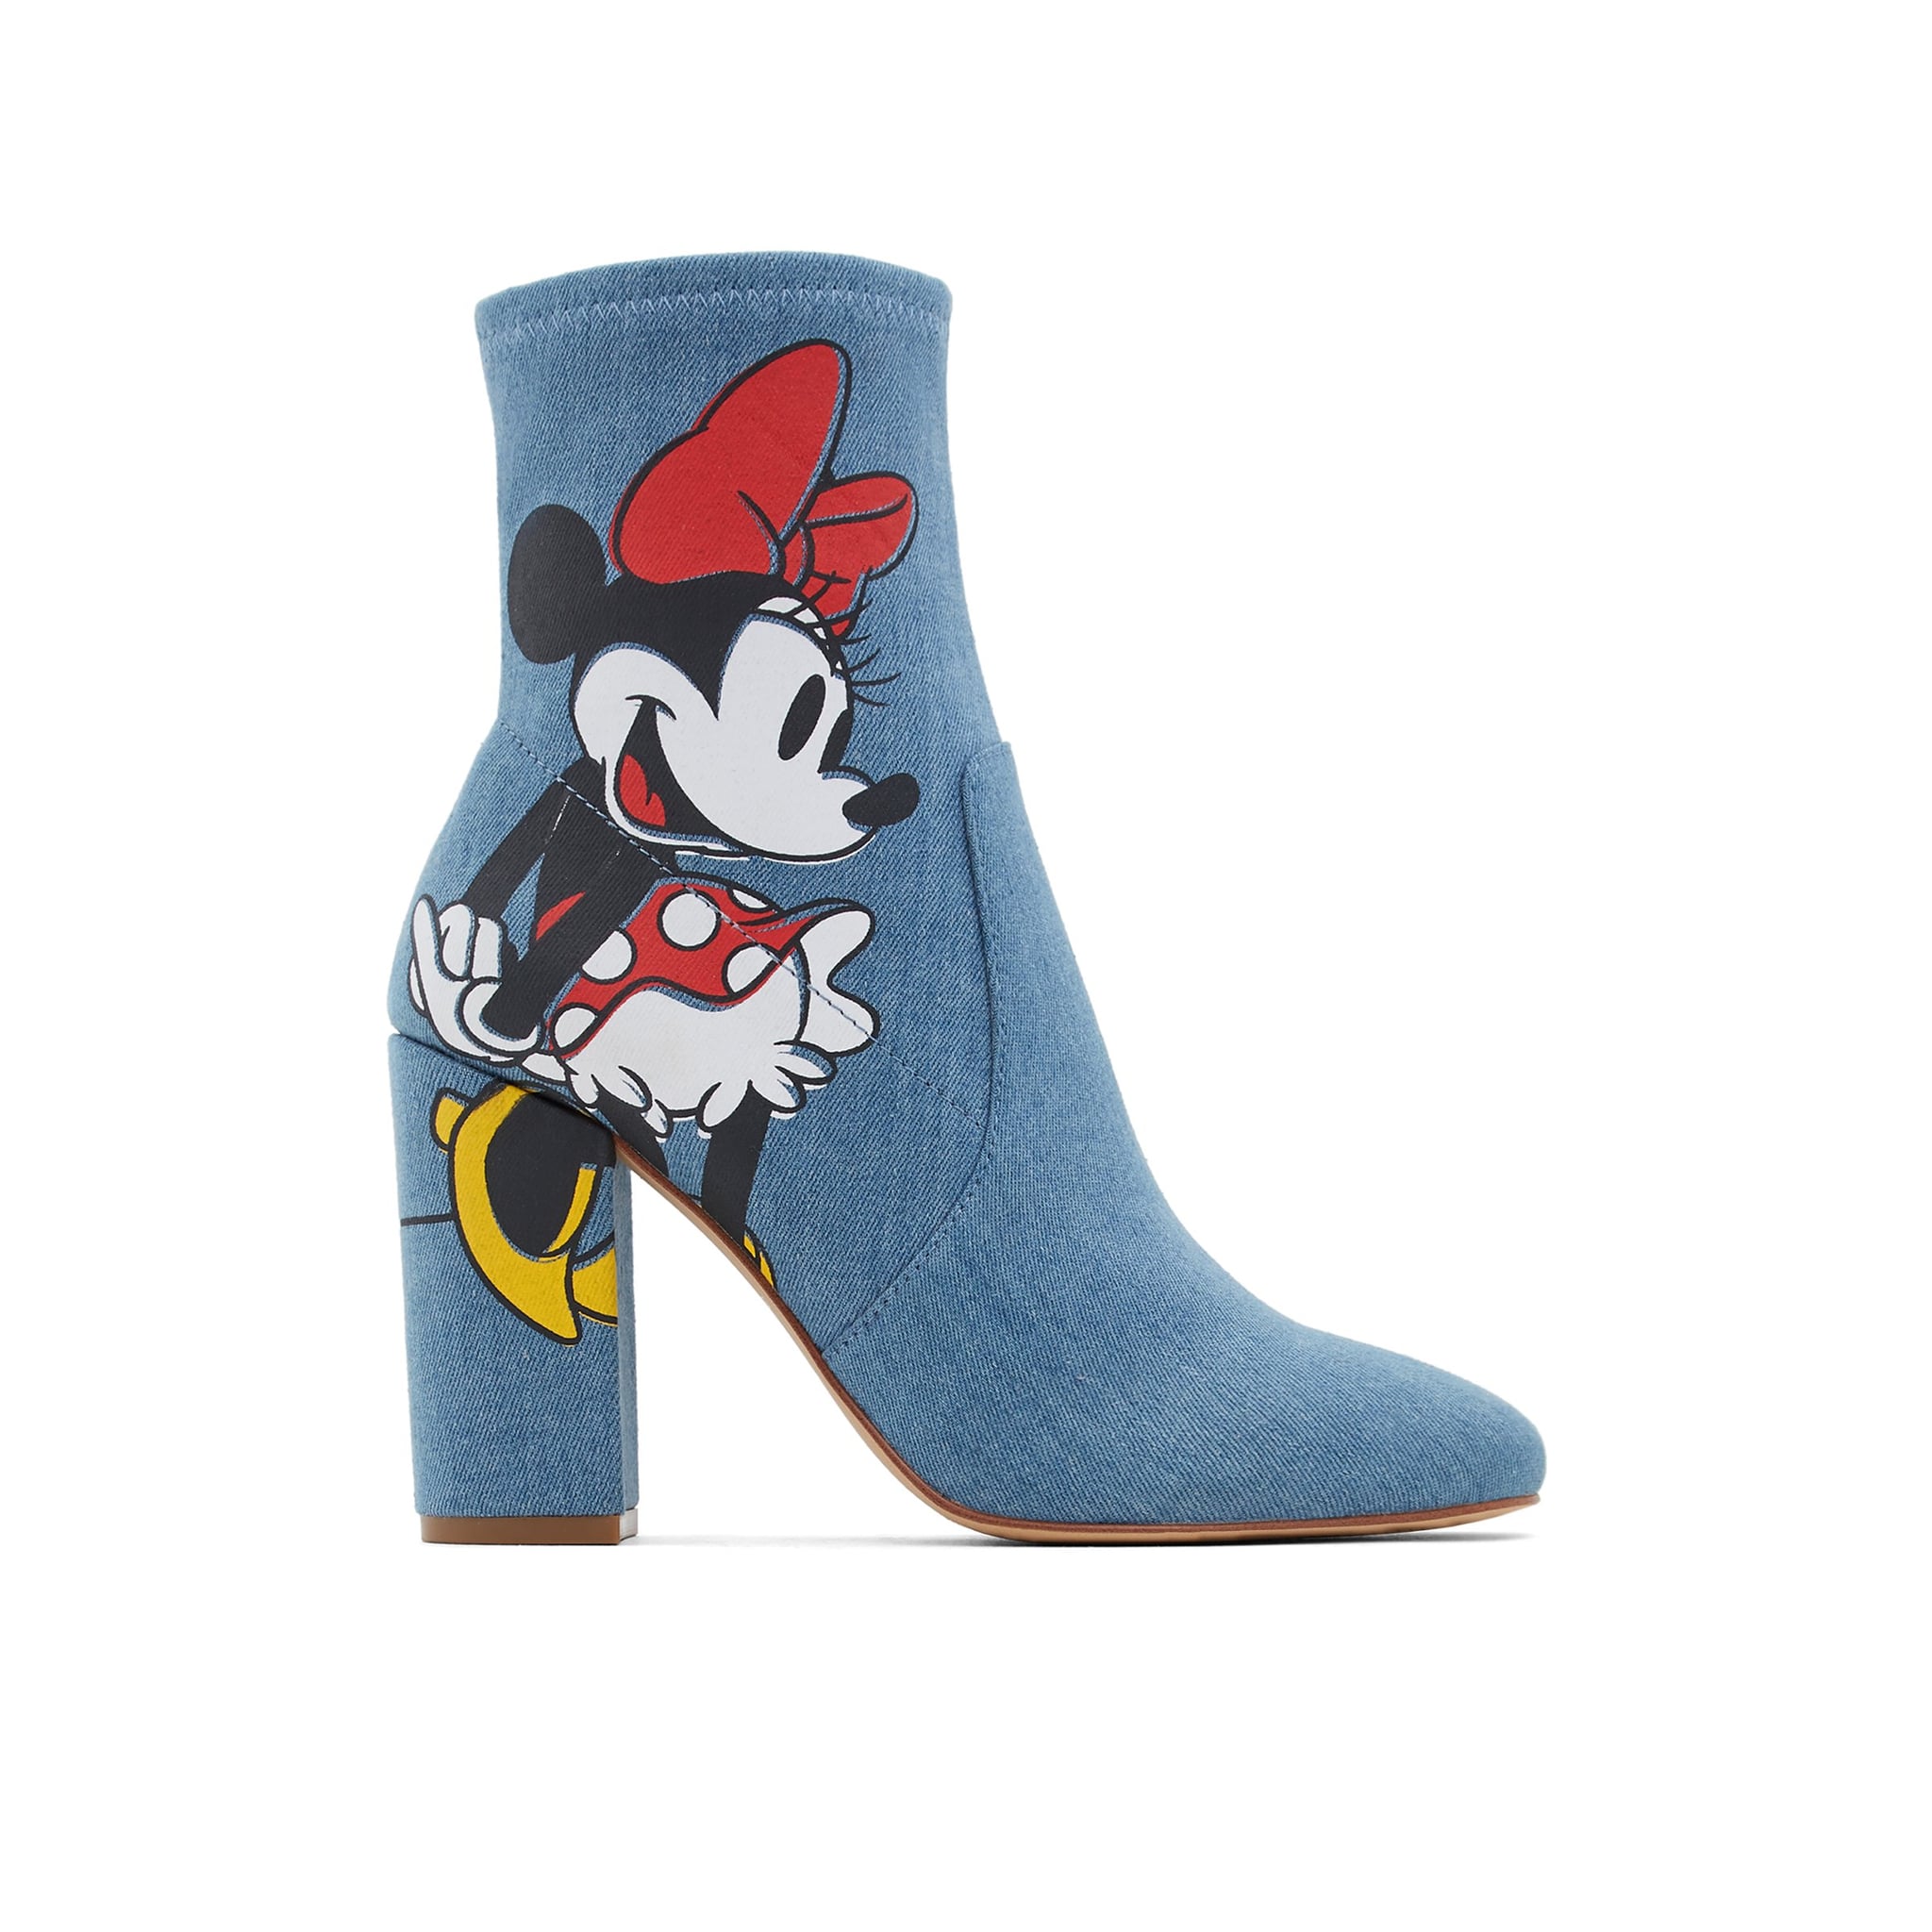 minnie mouse black boots